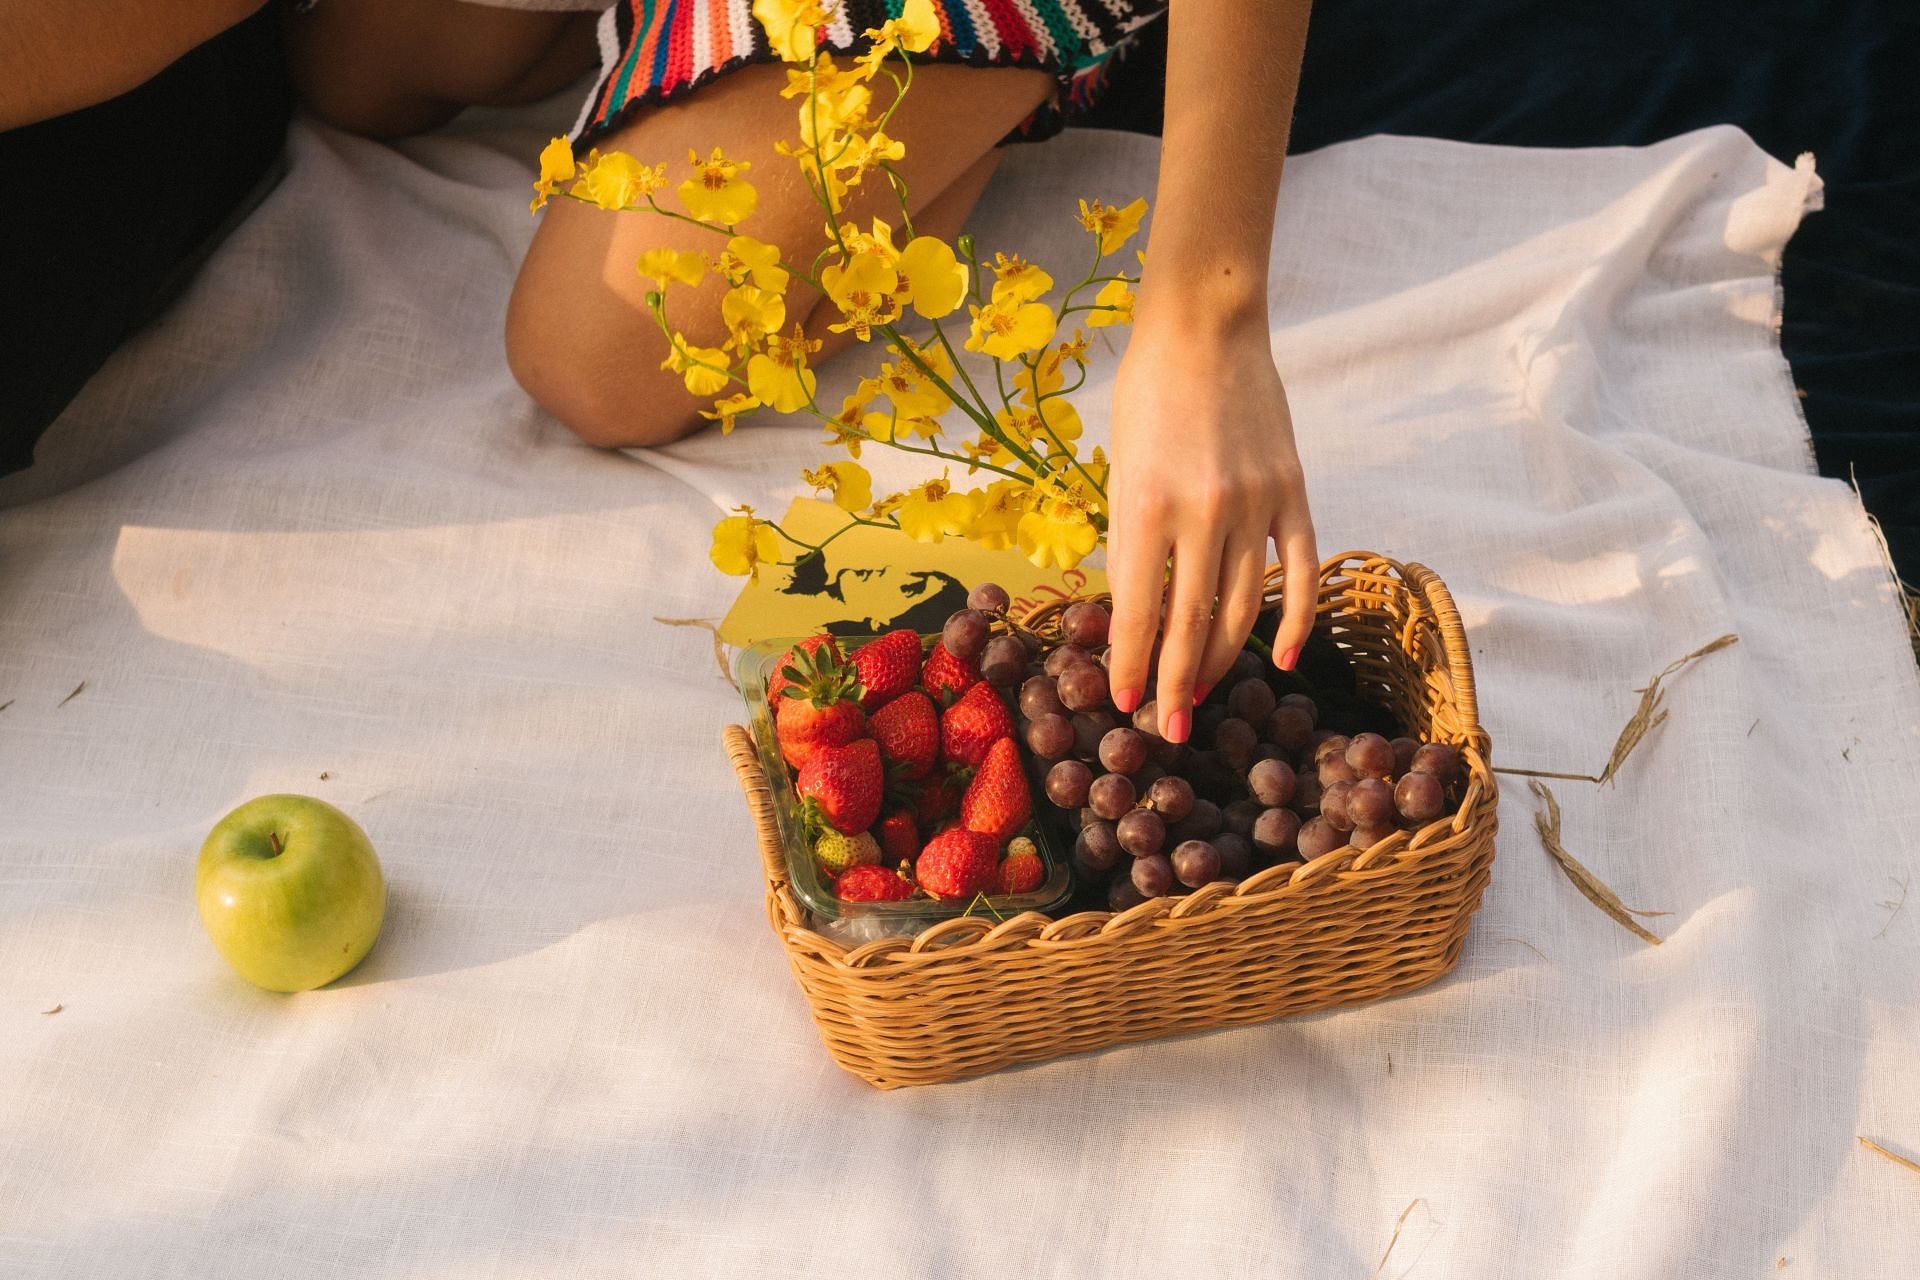 Choose foods that enrich your well-being. (Image via Pexels/Athena)